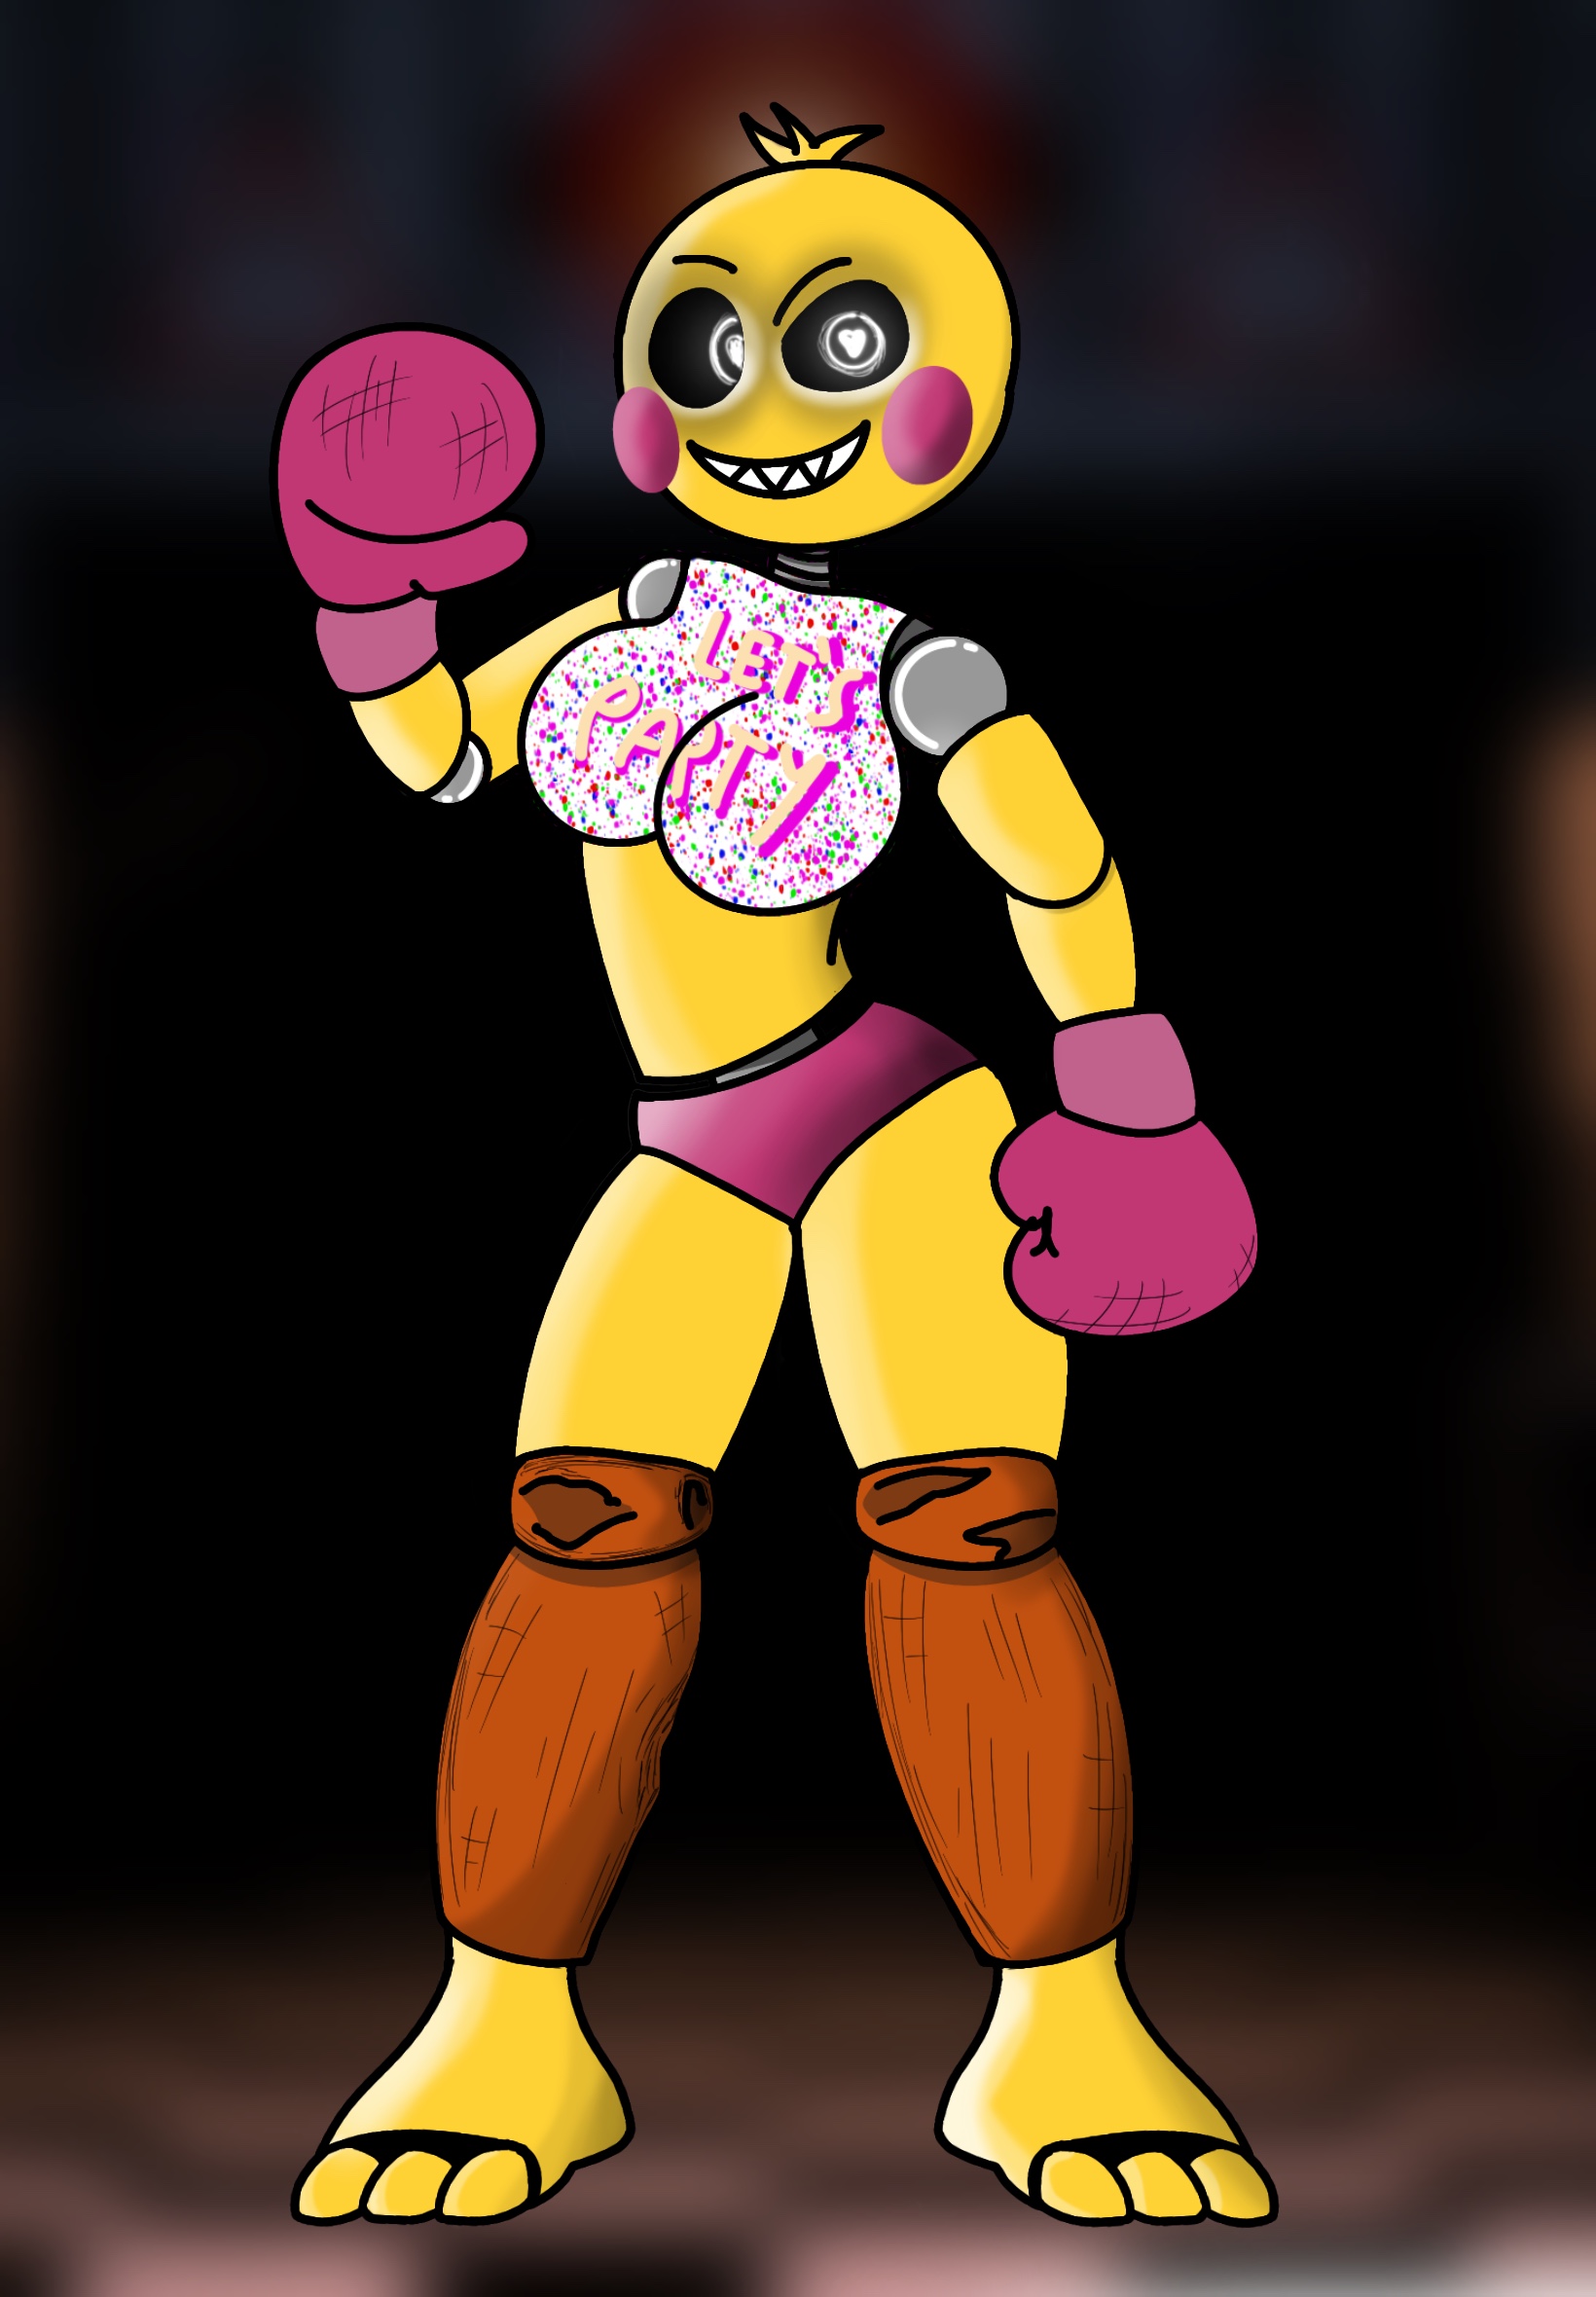 Toy Chica [Five Nights at Freddy's 2] by CorvoCaotico on Newgrounds